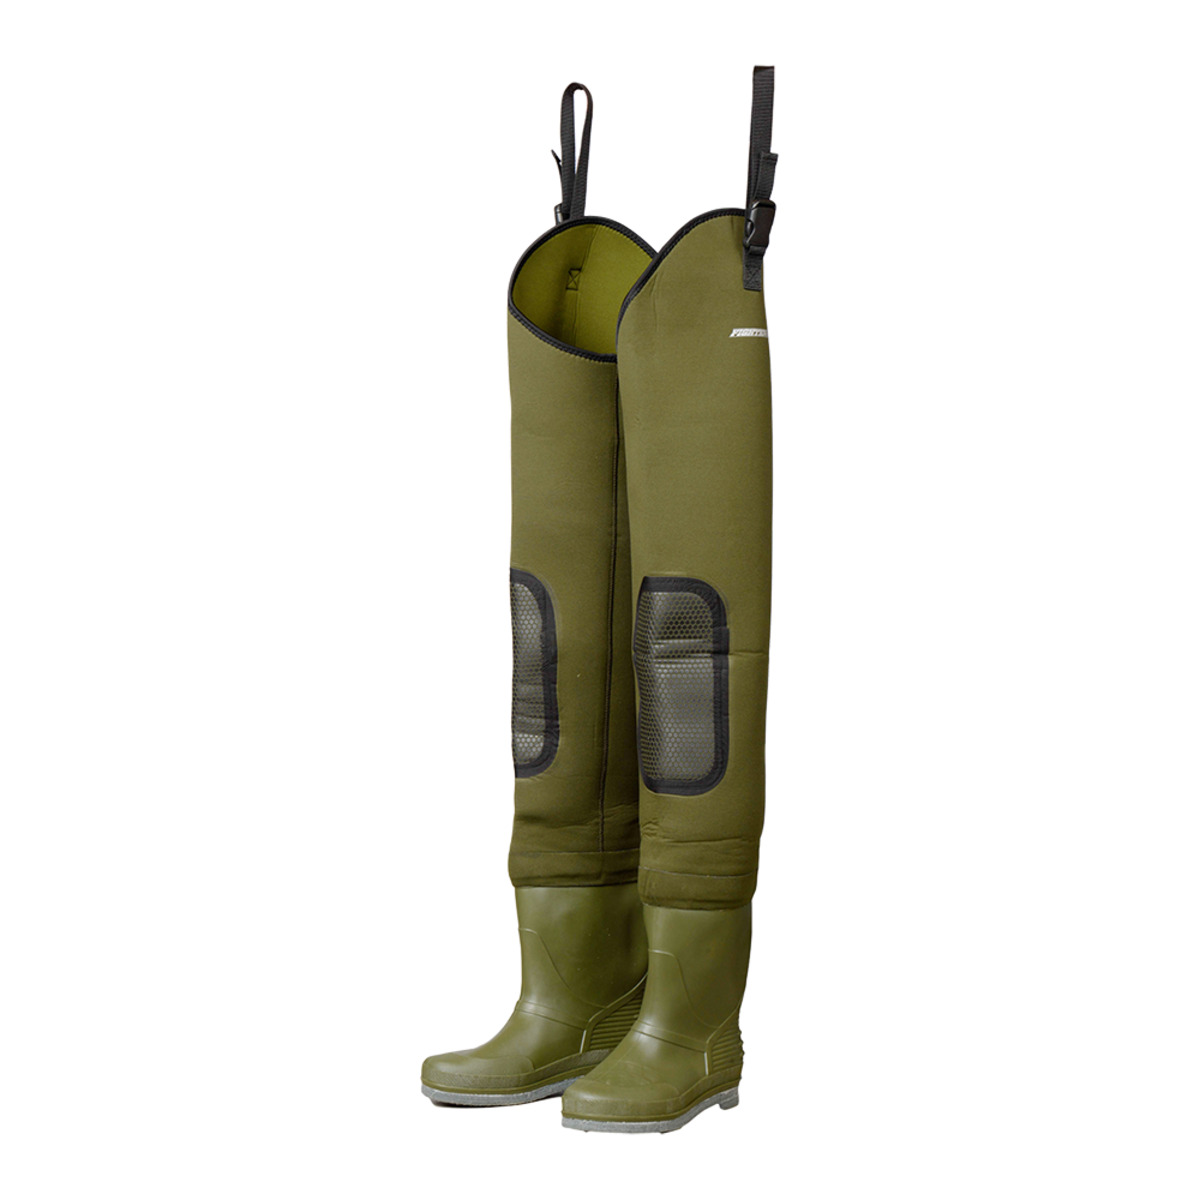 Dam Fighter Pro+ Neoprene Hip Waders Cleated Sole - 40/41